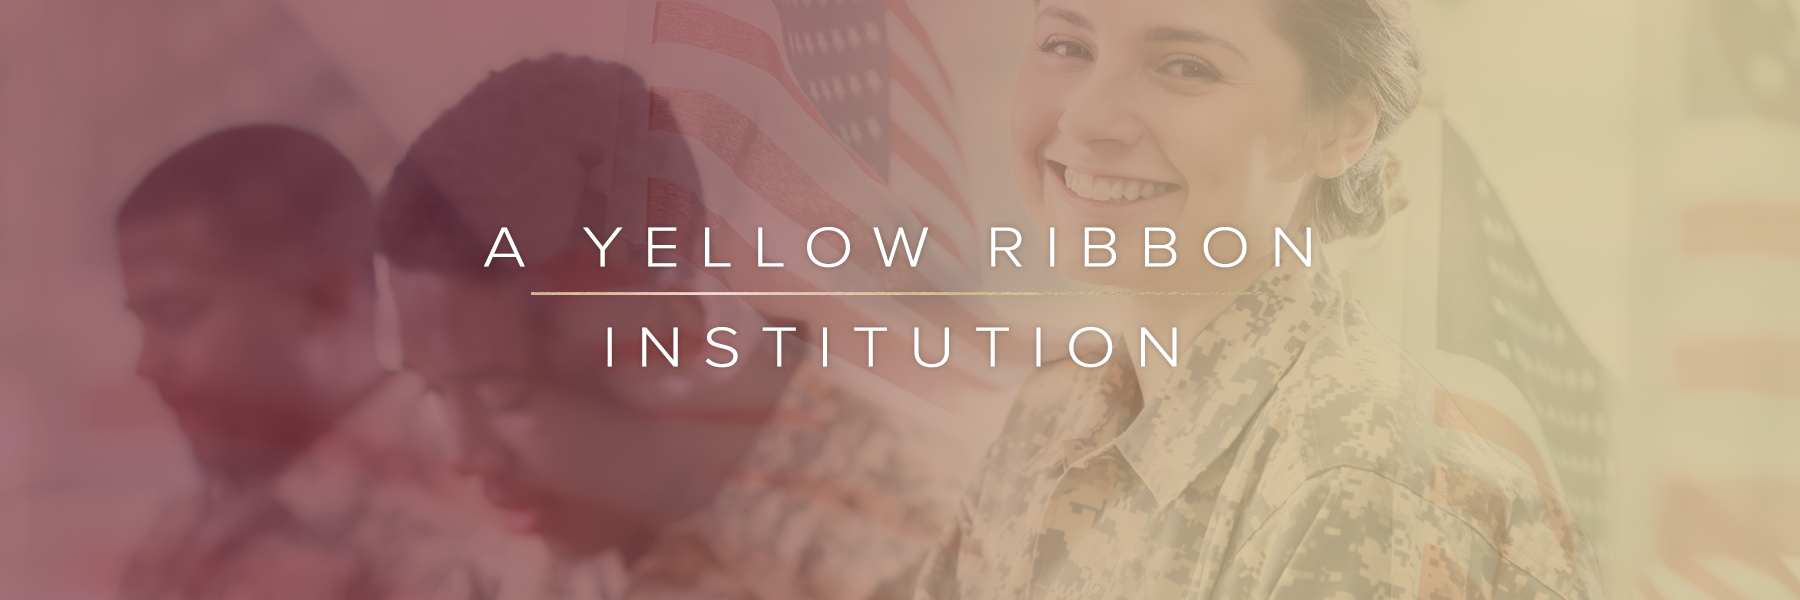 A Yellow Ribbon Institution